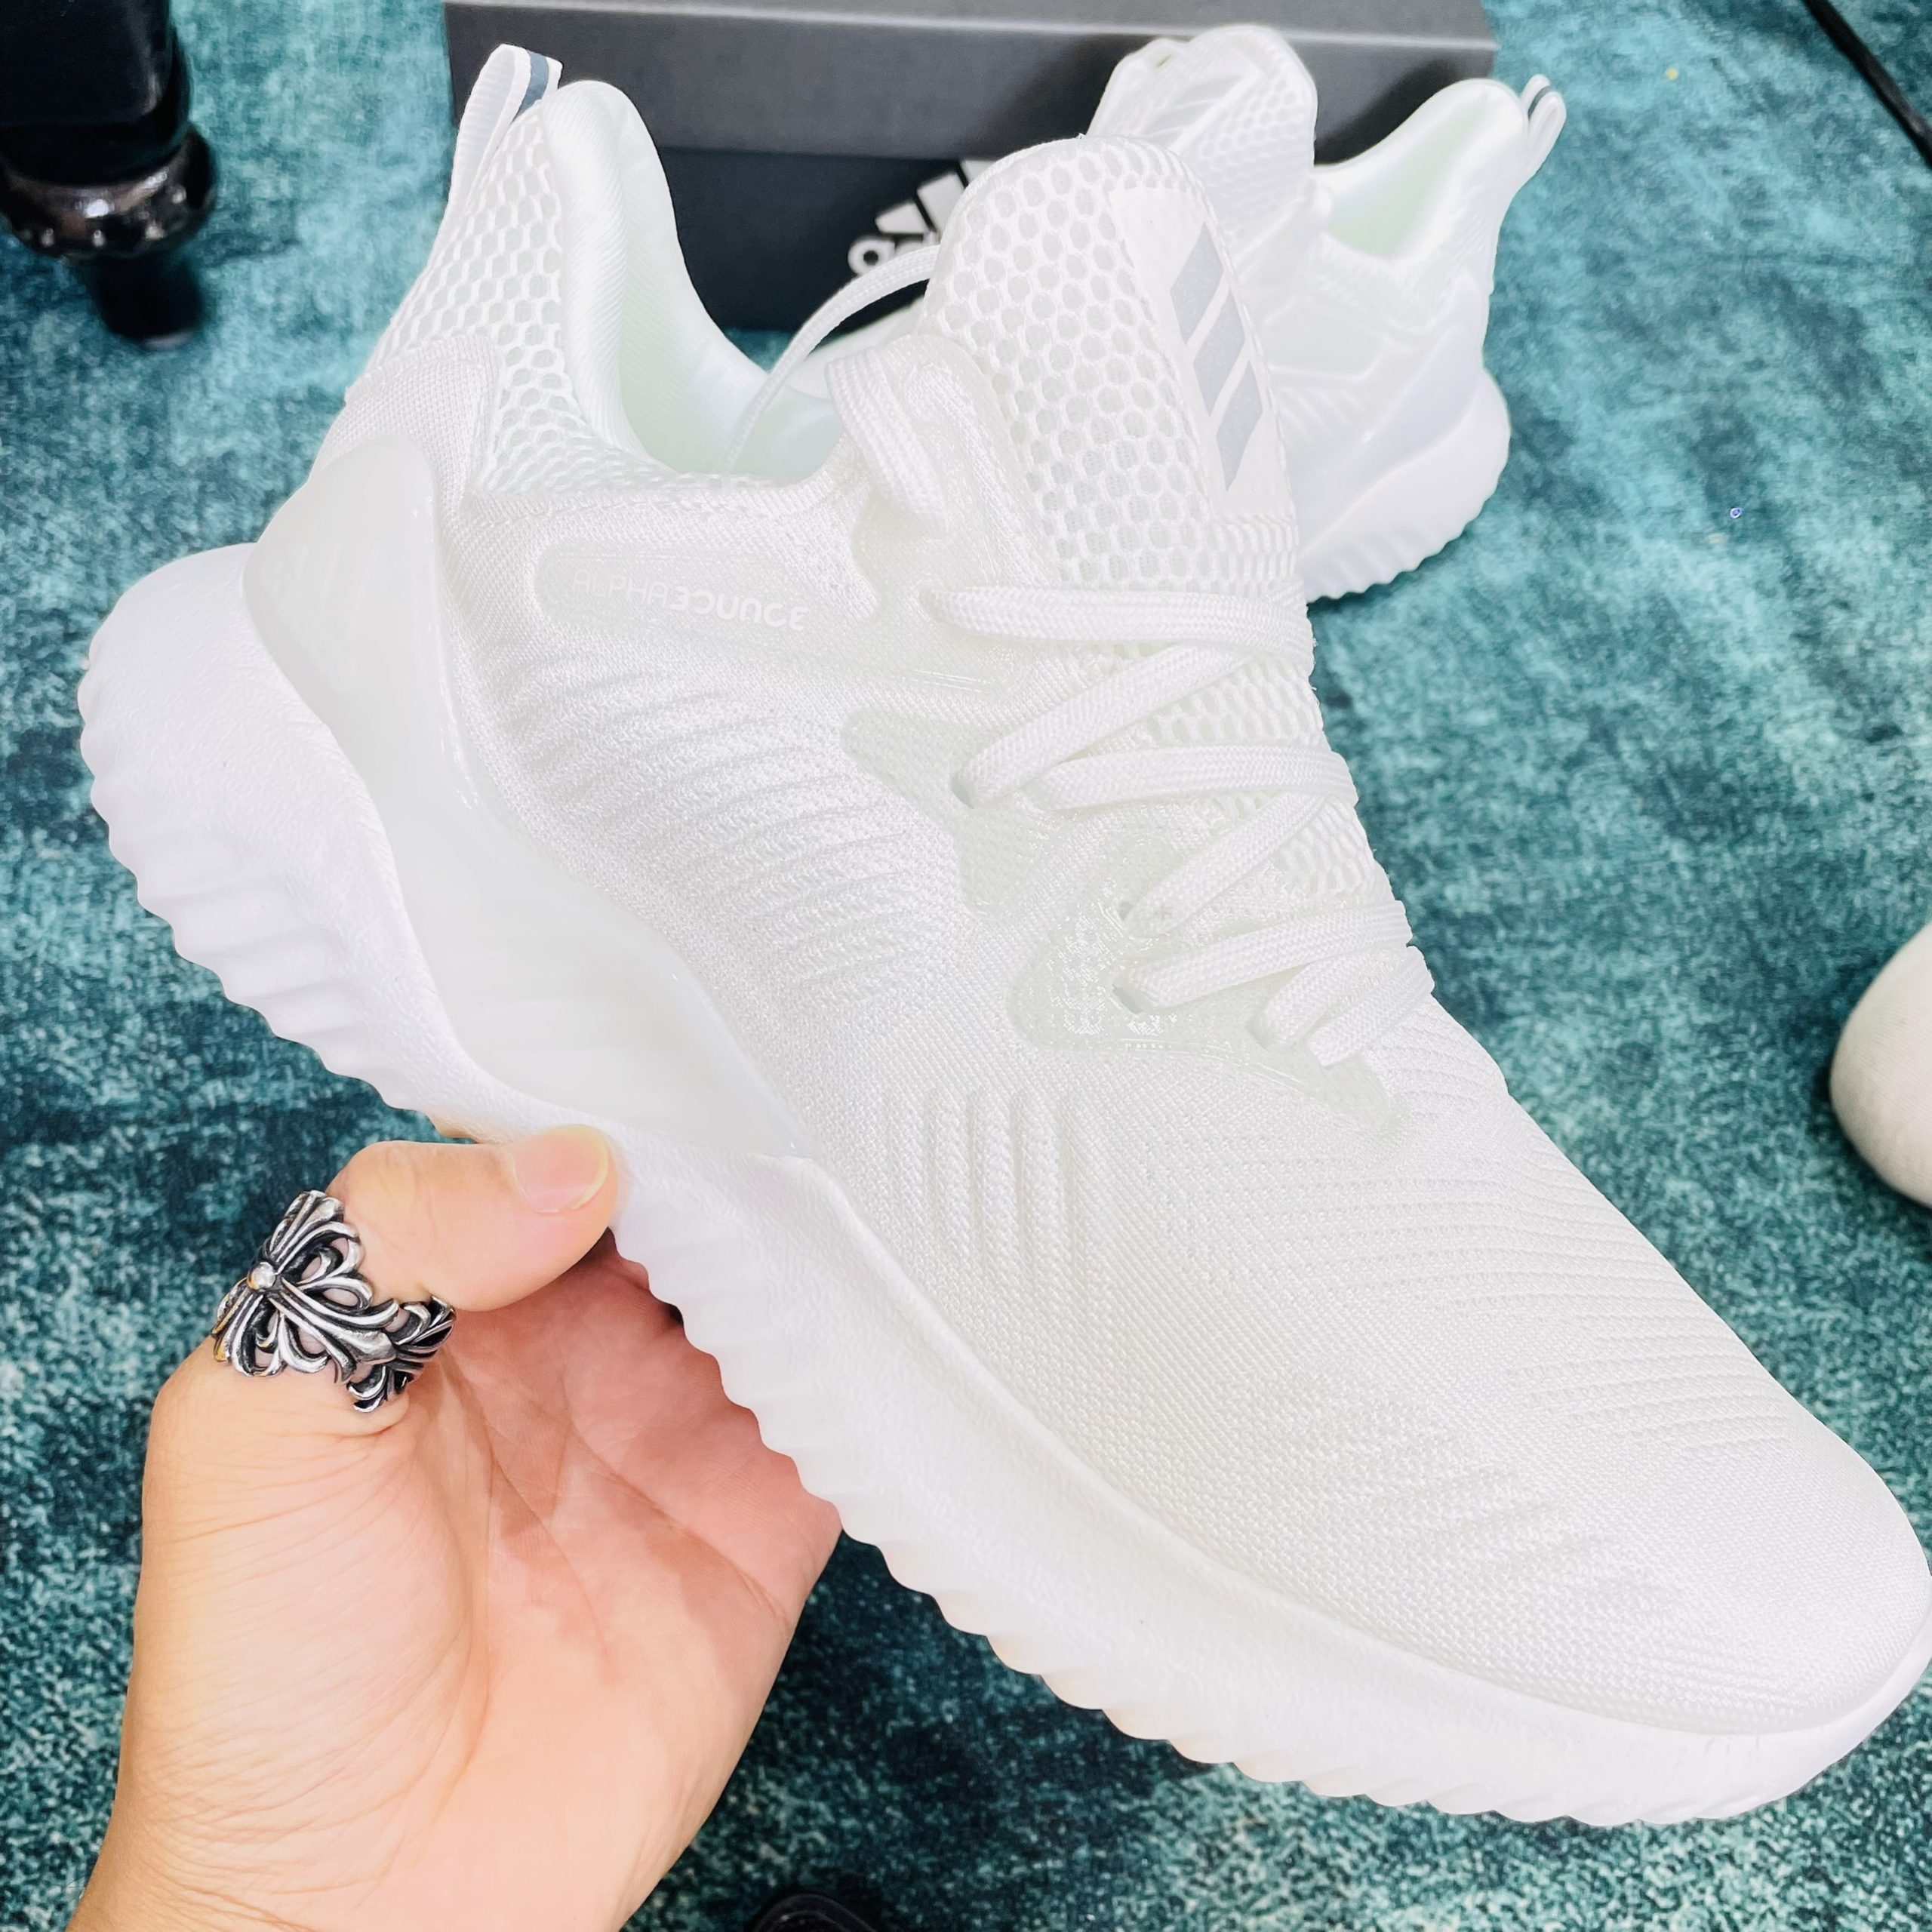 Giày Adidas Alphabounce Trắng Beyond Cloud White Rep 1:1